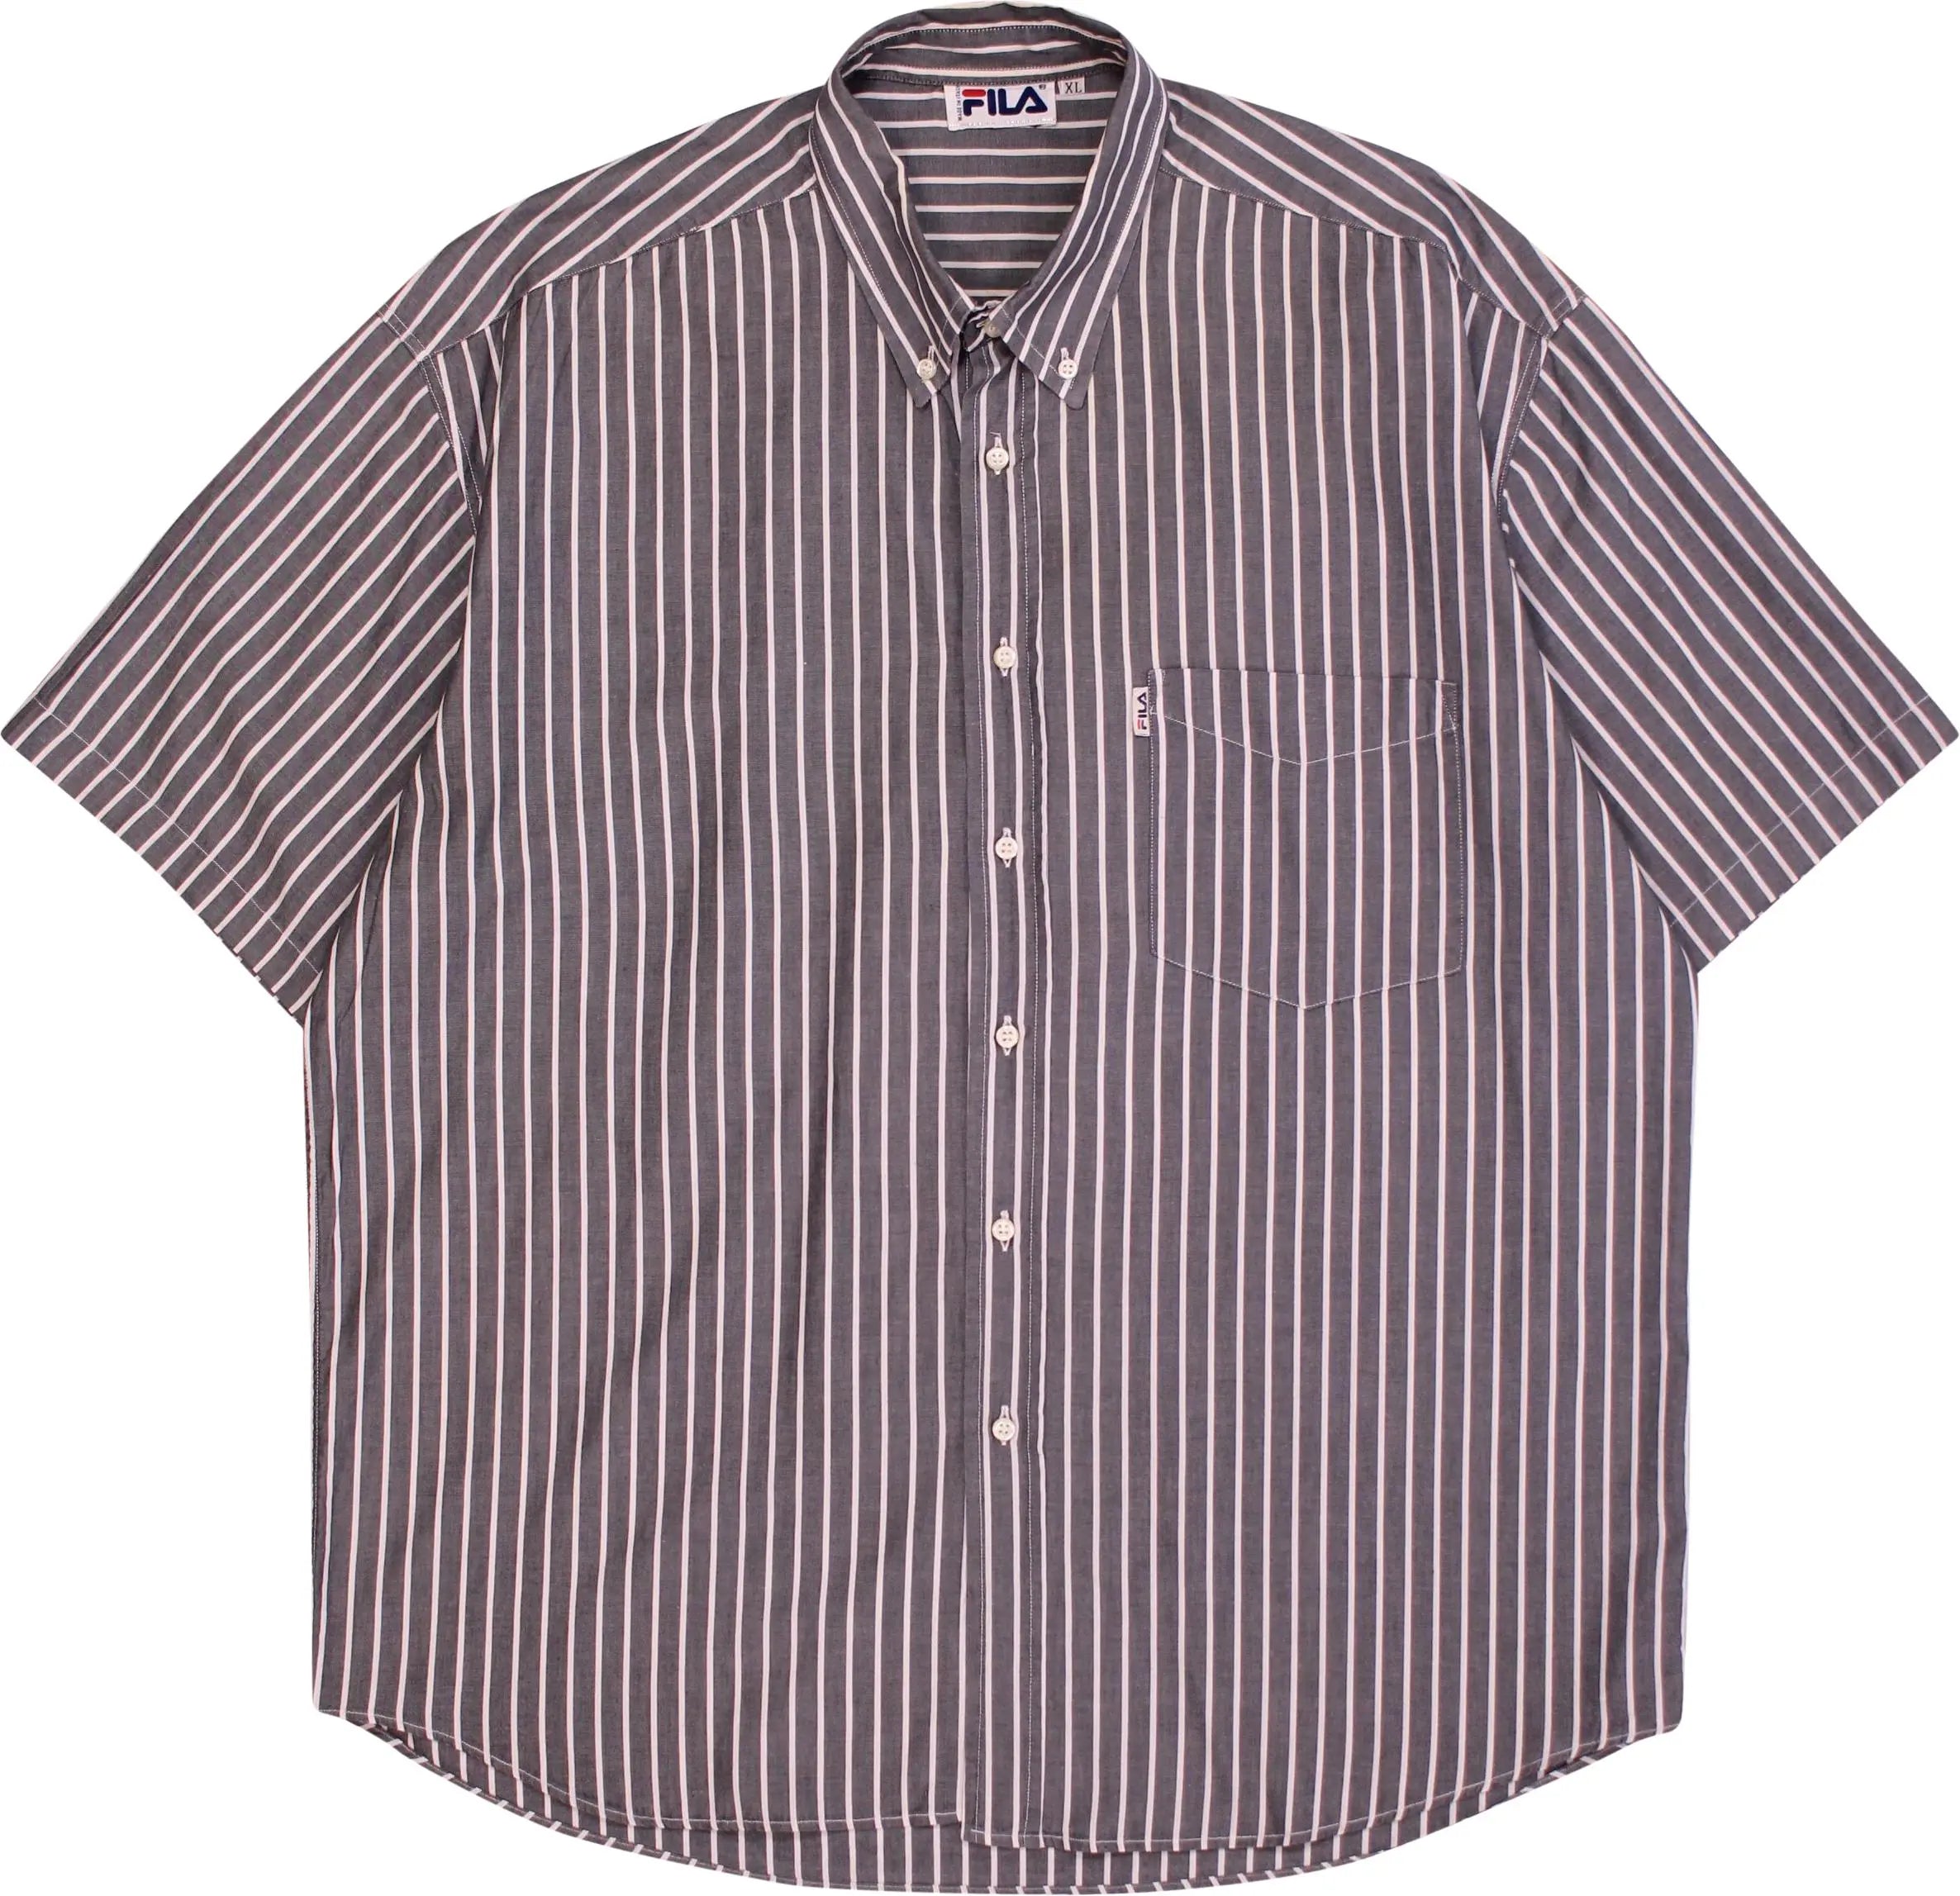 Fila - Striped Short Sleeve Shirt by Fila- ThriftTale.com - Vintage and second handclothing